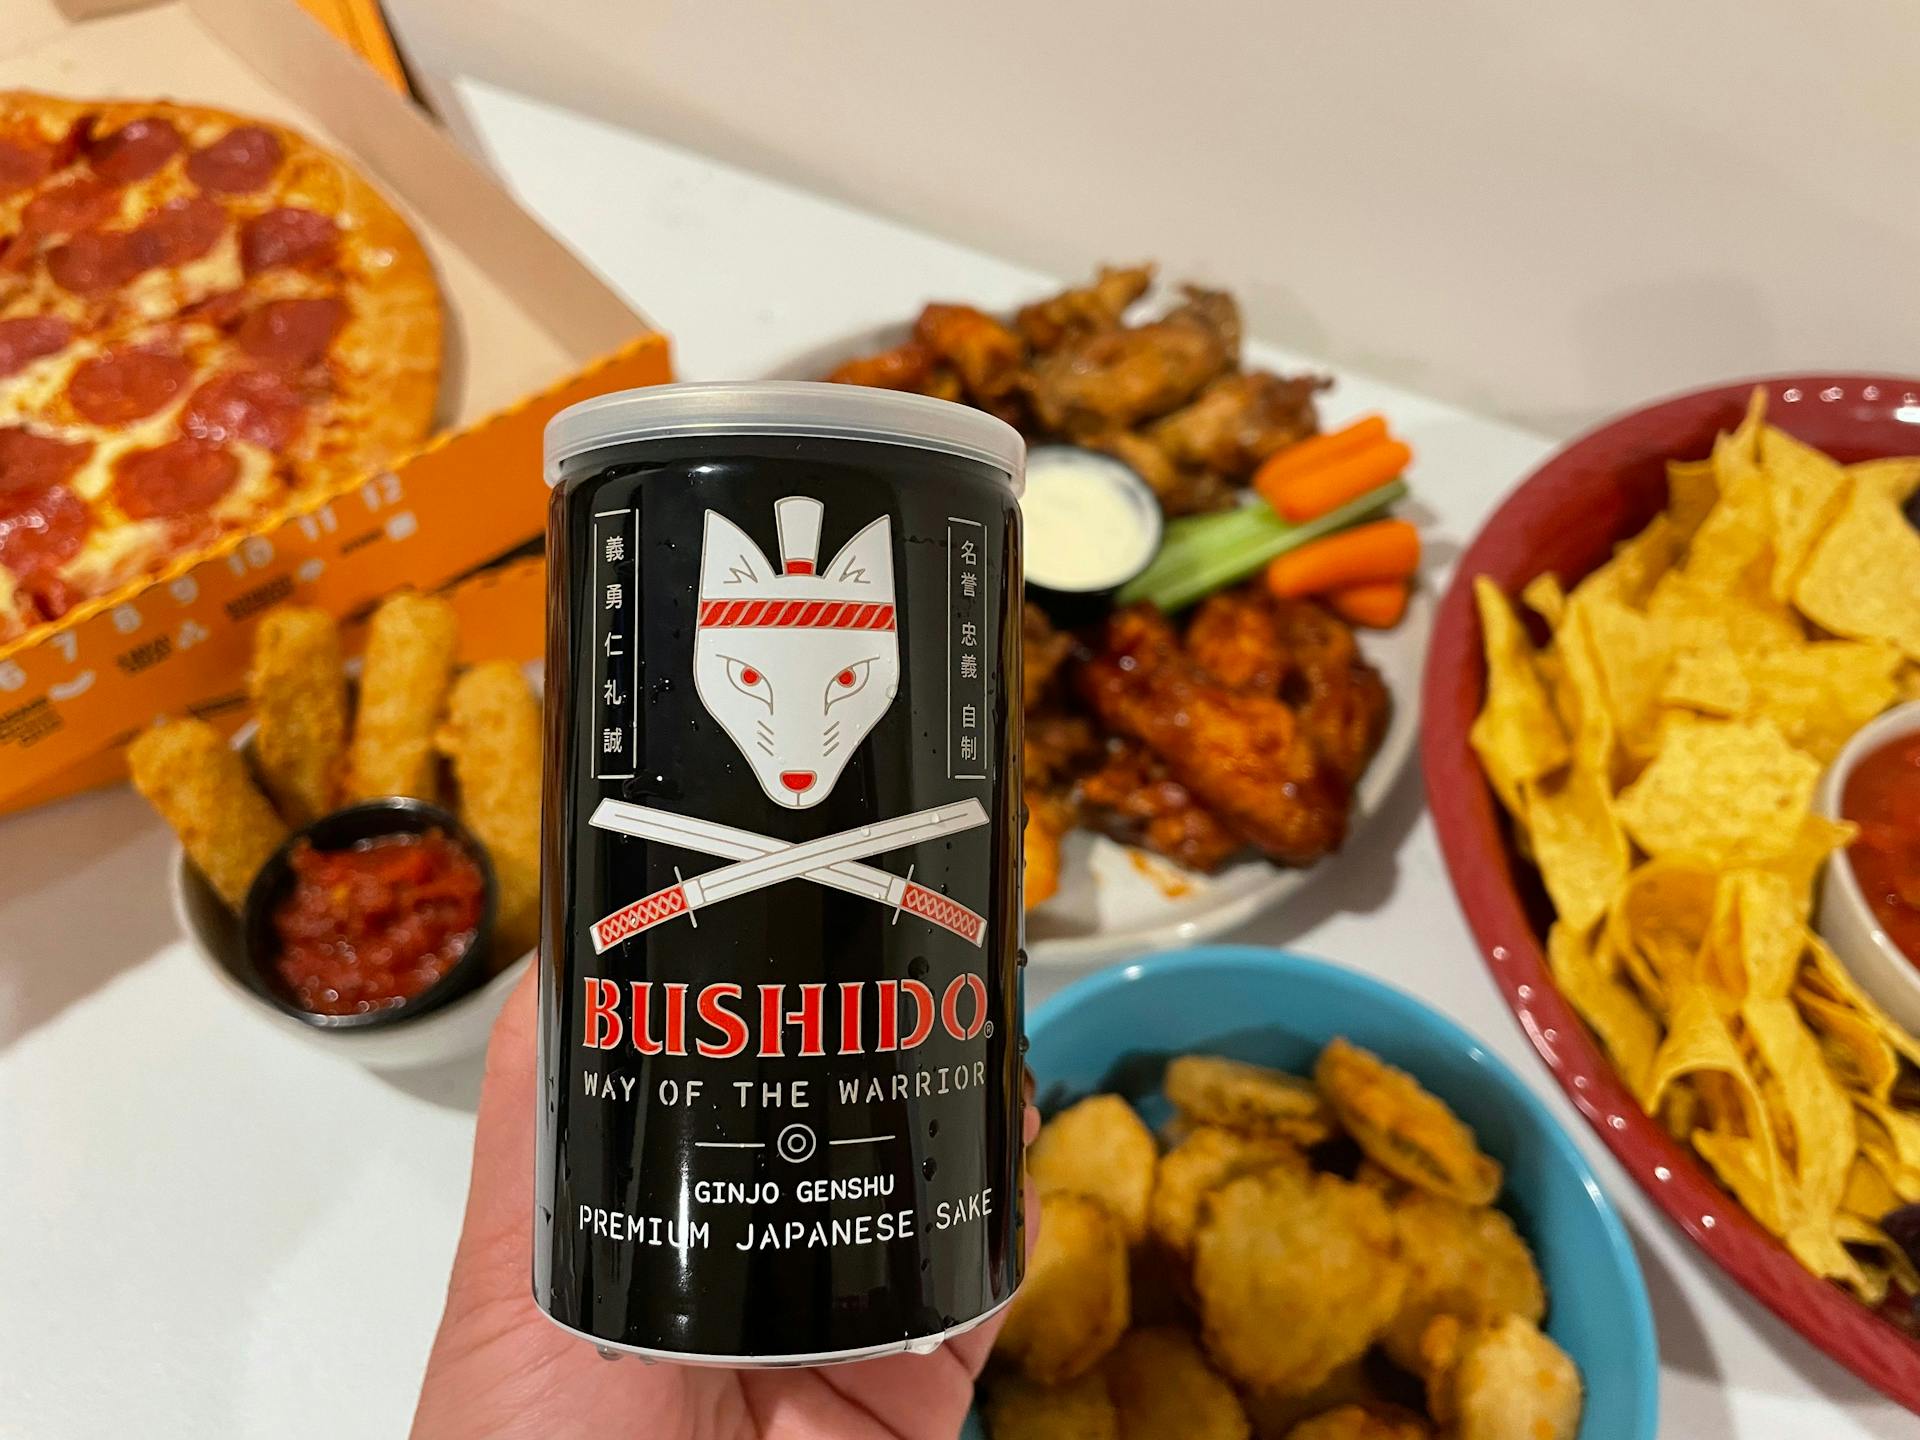 Bushido “Way of the Warrior” is served at the evening’s pre-game activities.